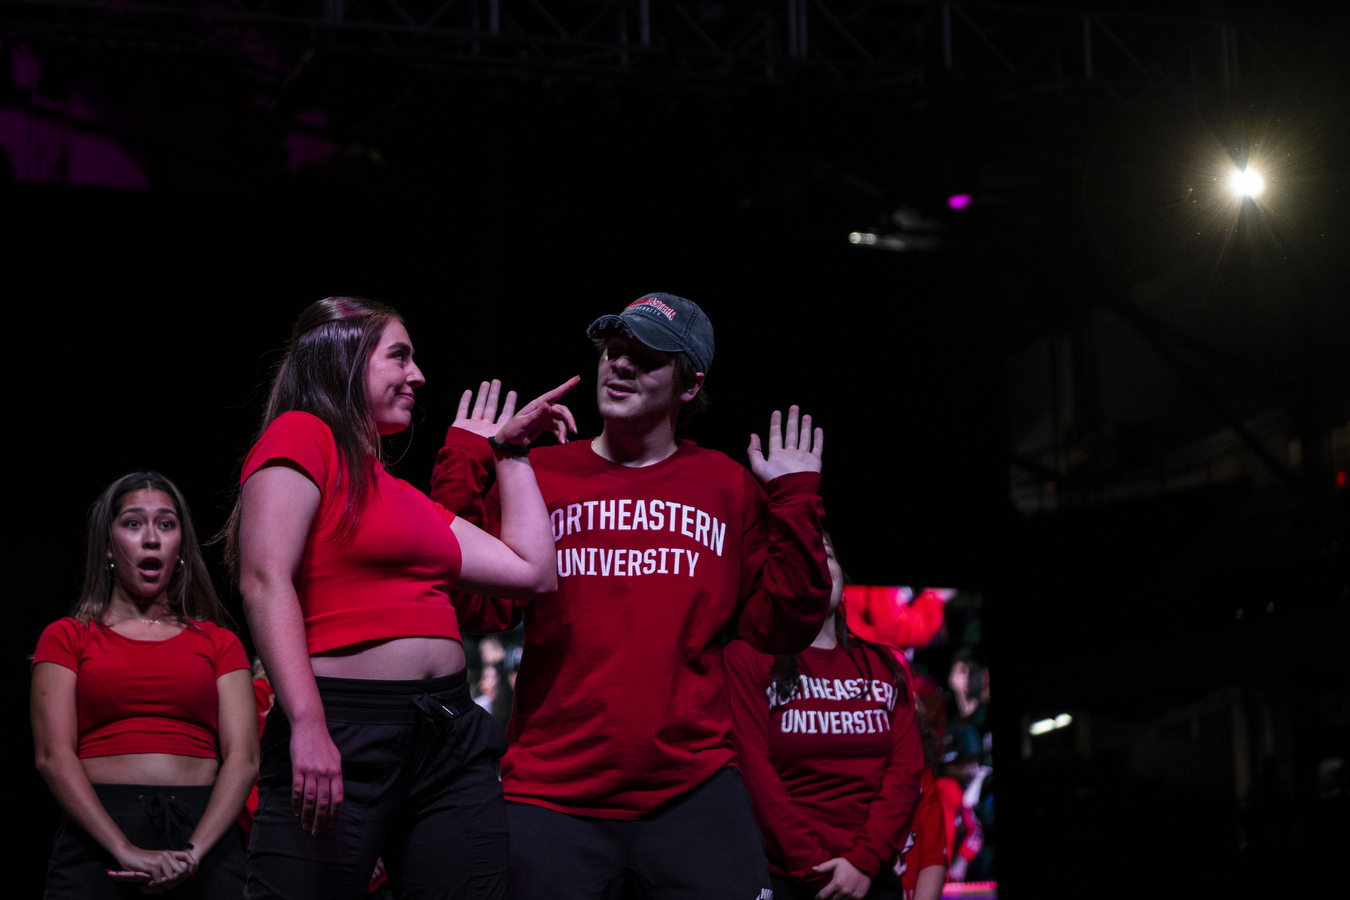 A group of people wear red shirts and black pants while dancing together in a dimly lit arena. 